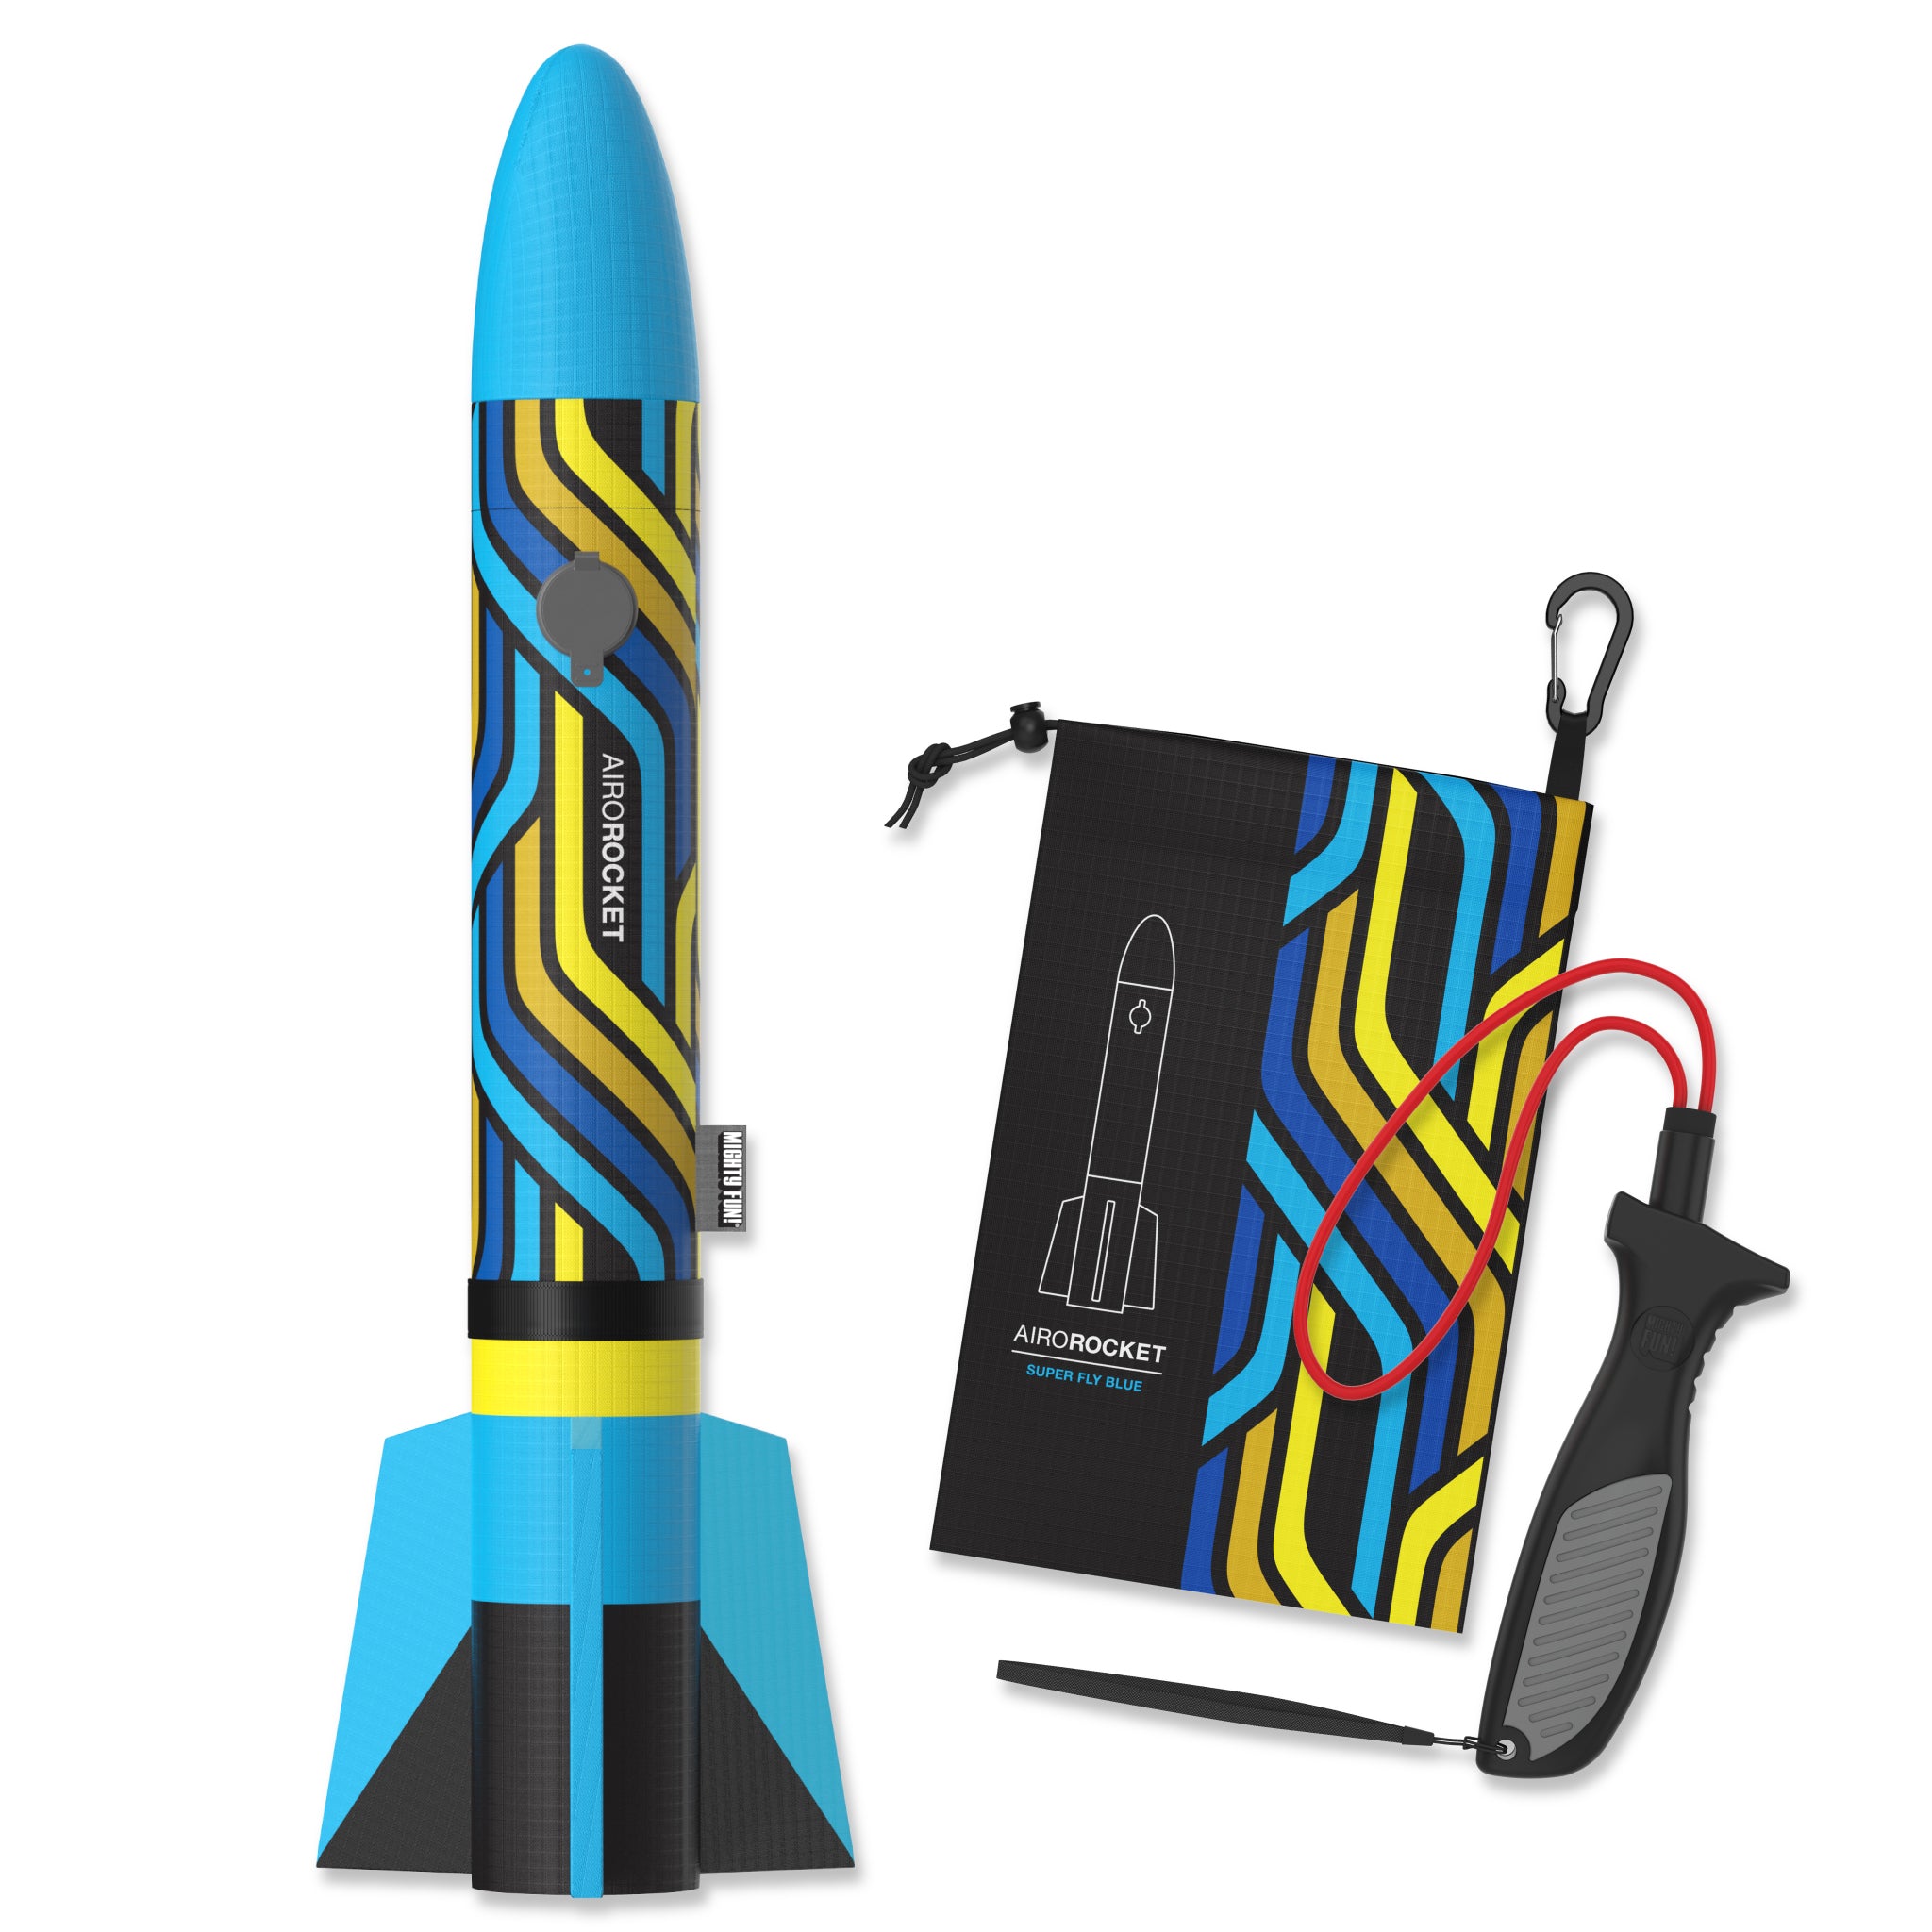 Blue Airo Rocket from Mighty Fun!